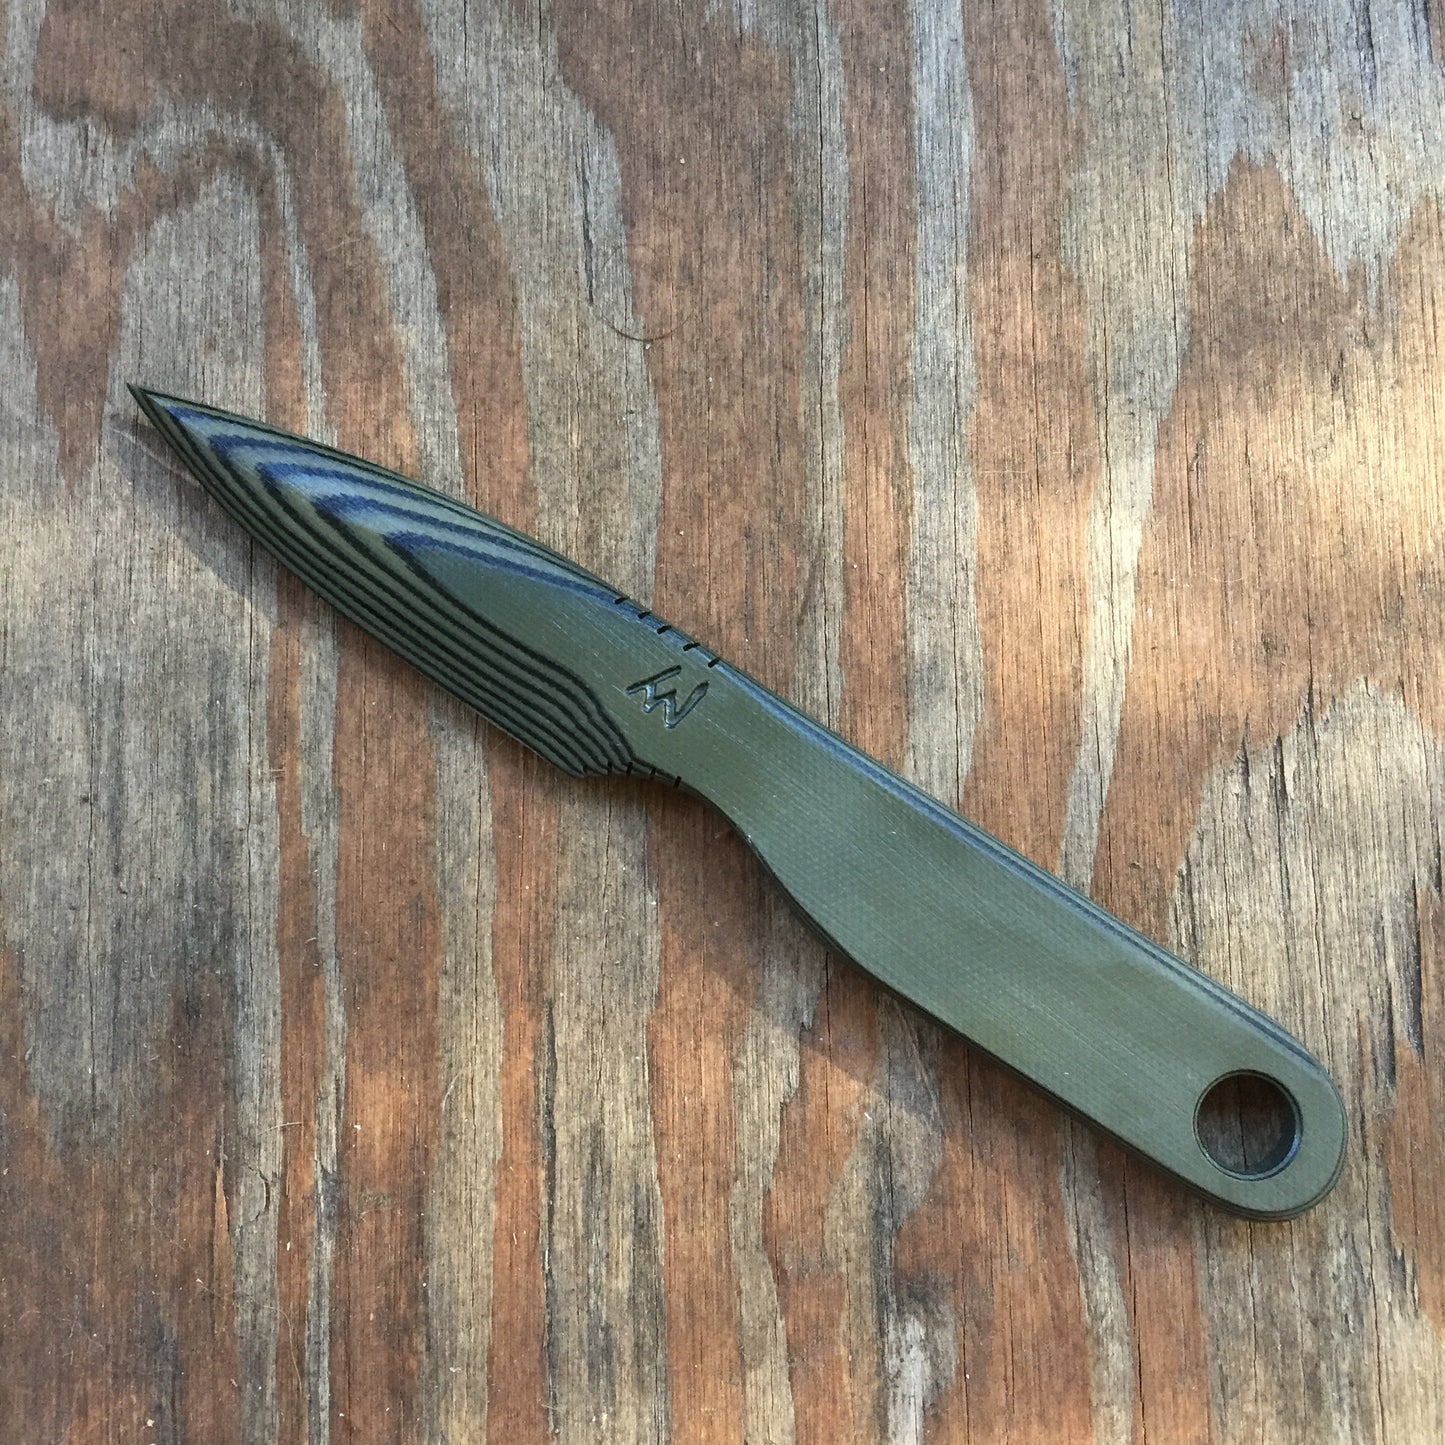 Non-Metallic Conceal Carry Knife - Tag XL